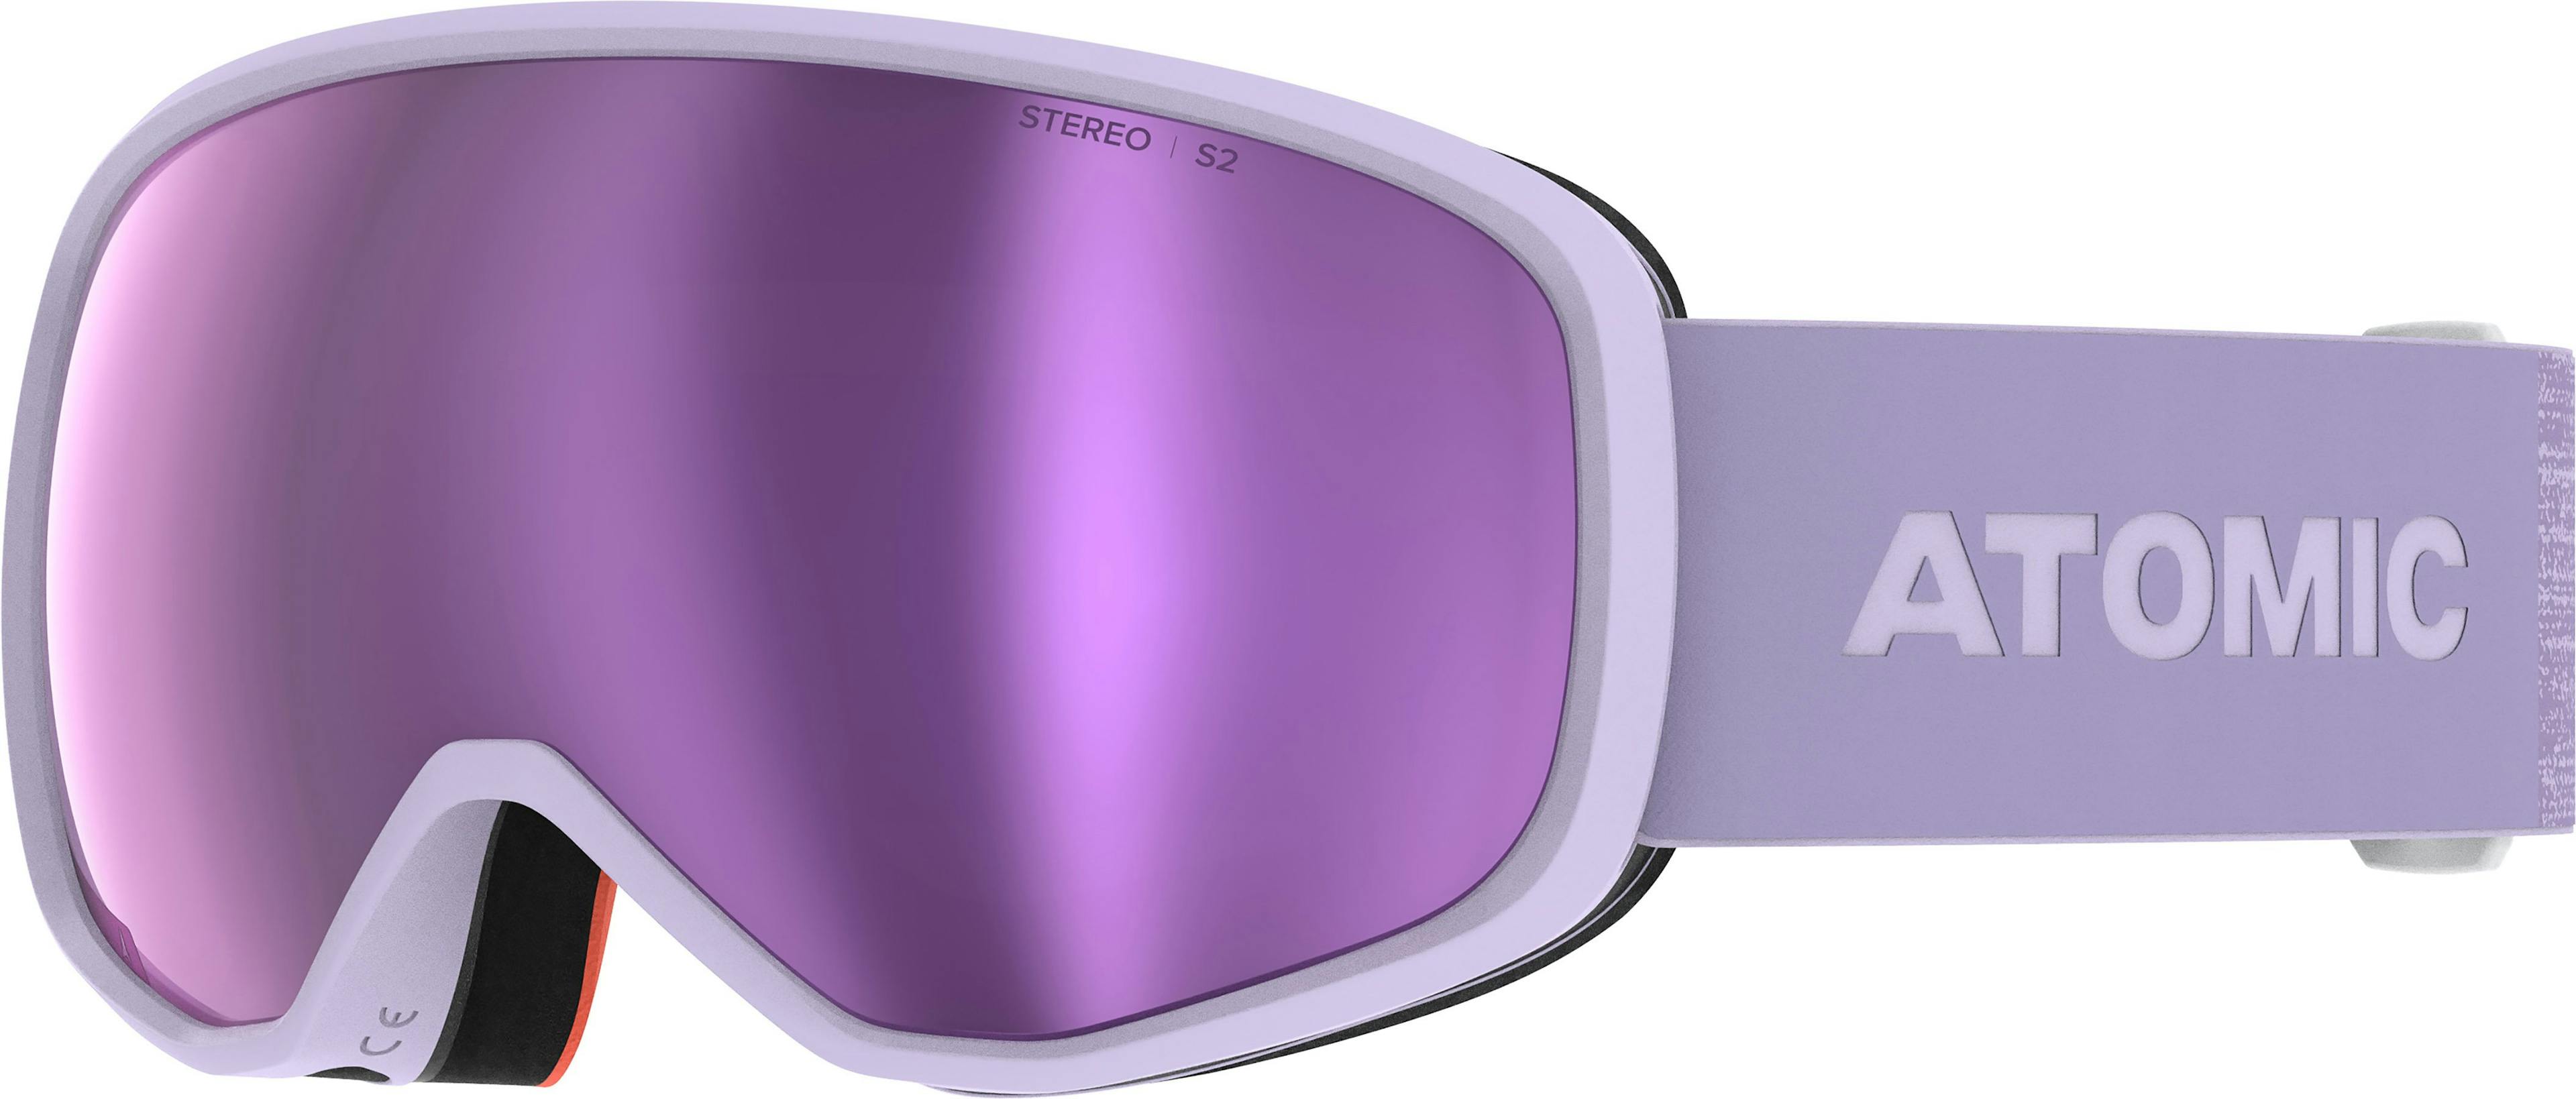 Product image for Revent Stereo Goggles